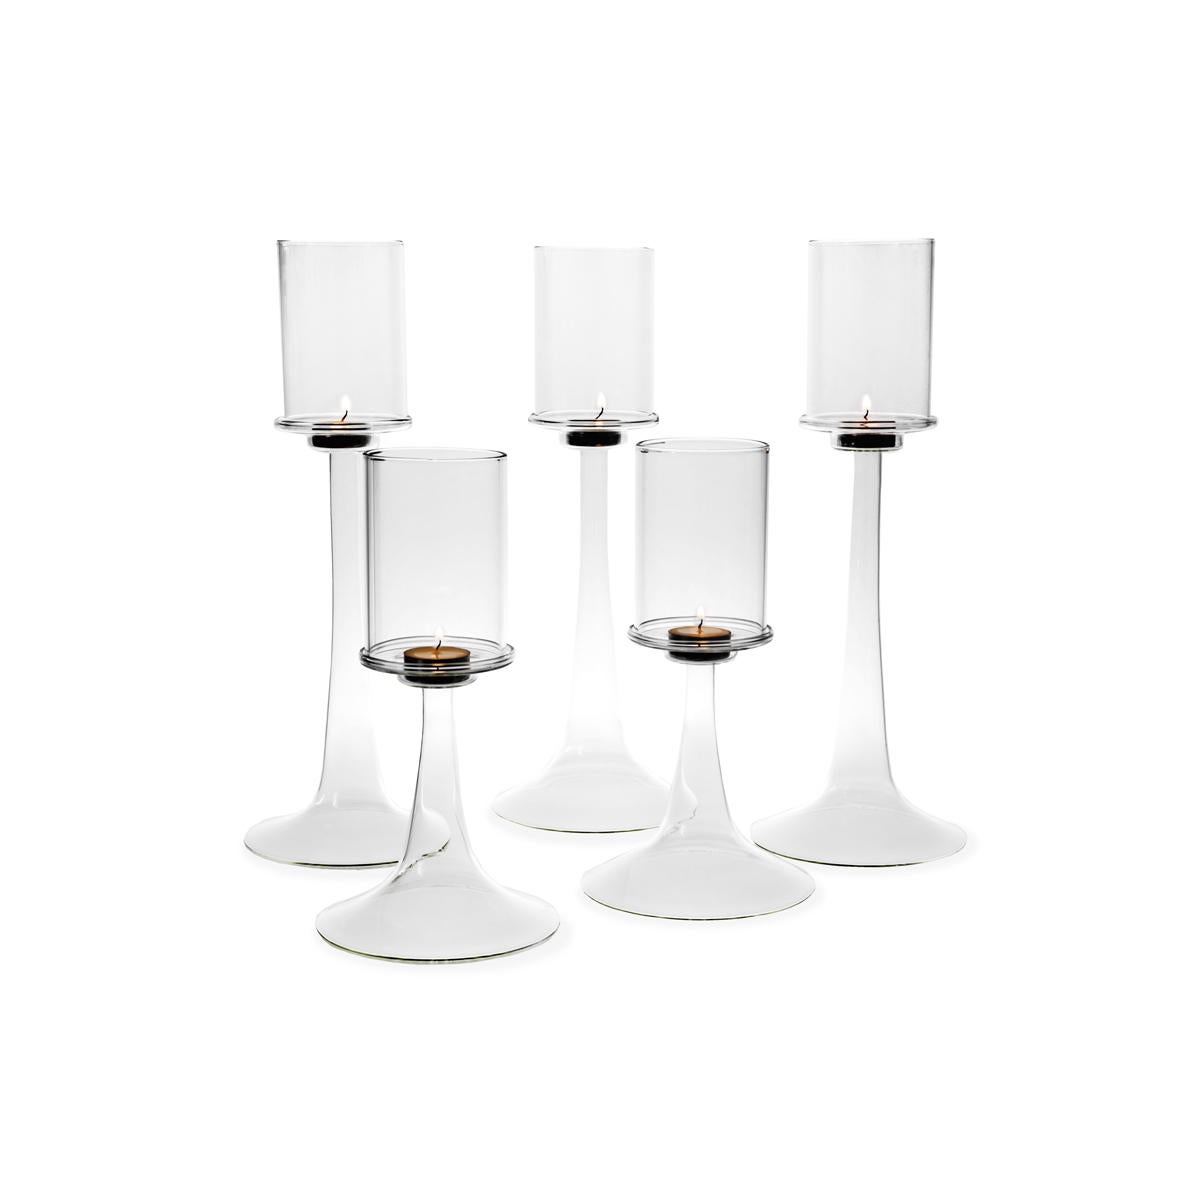 Fiamma is an elegant candle holder in blown glass consisting of two elements: a tapered and slim base on which a cylindrical lampshade lays. Fiamma, designed by Aldo Cibic, is available also in a higher size.